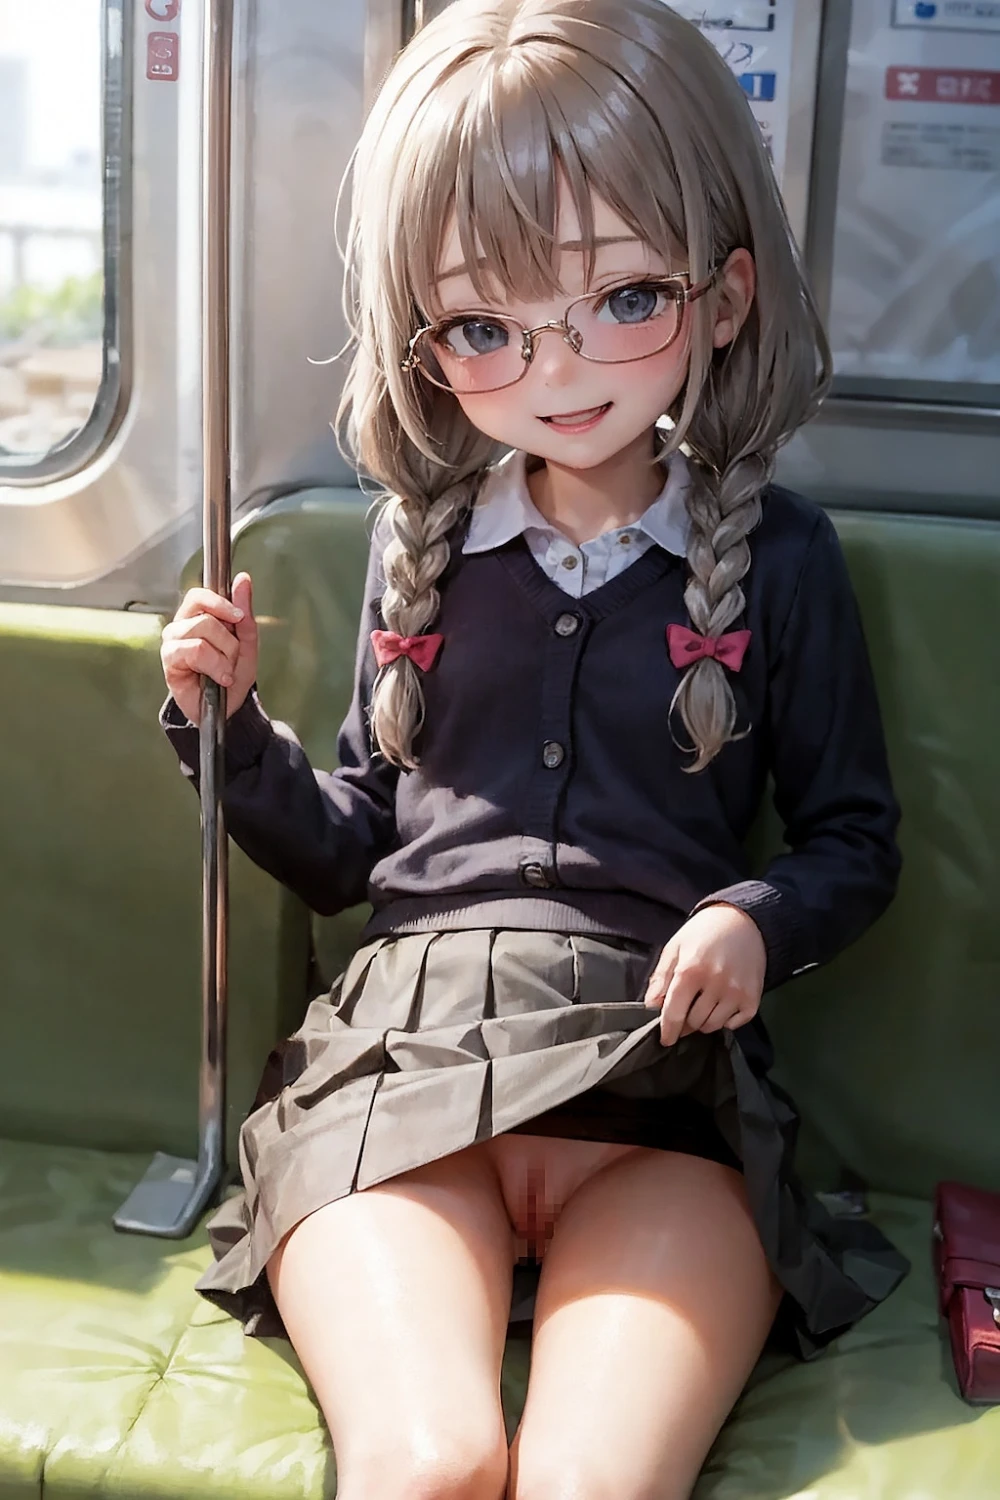 train-anime-style-adults-only-9